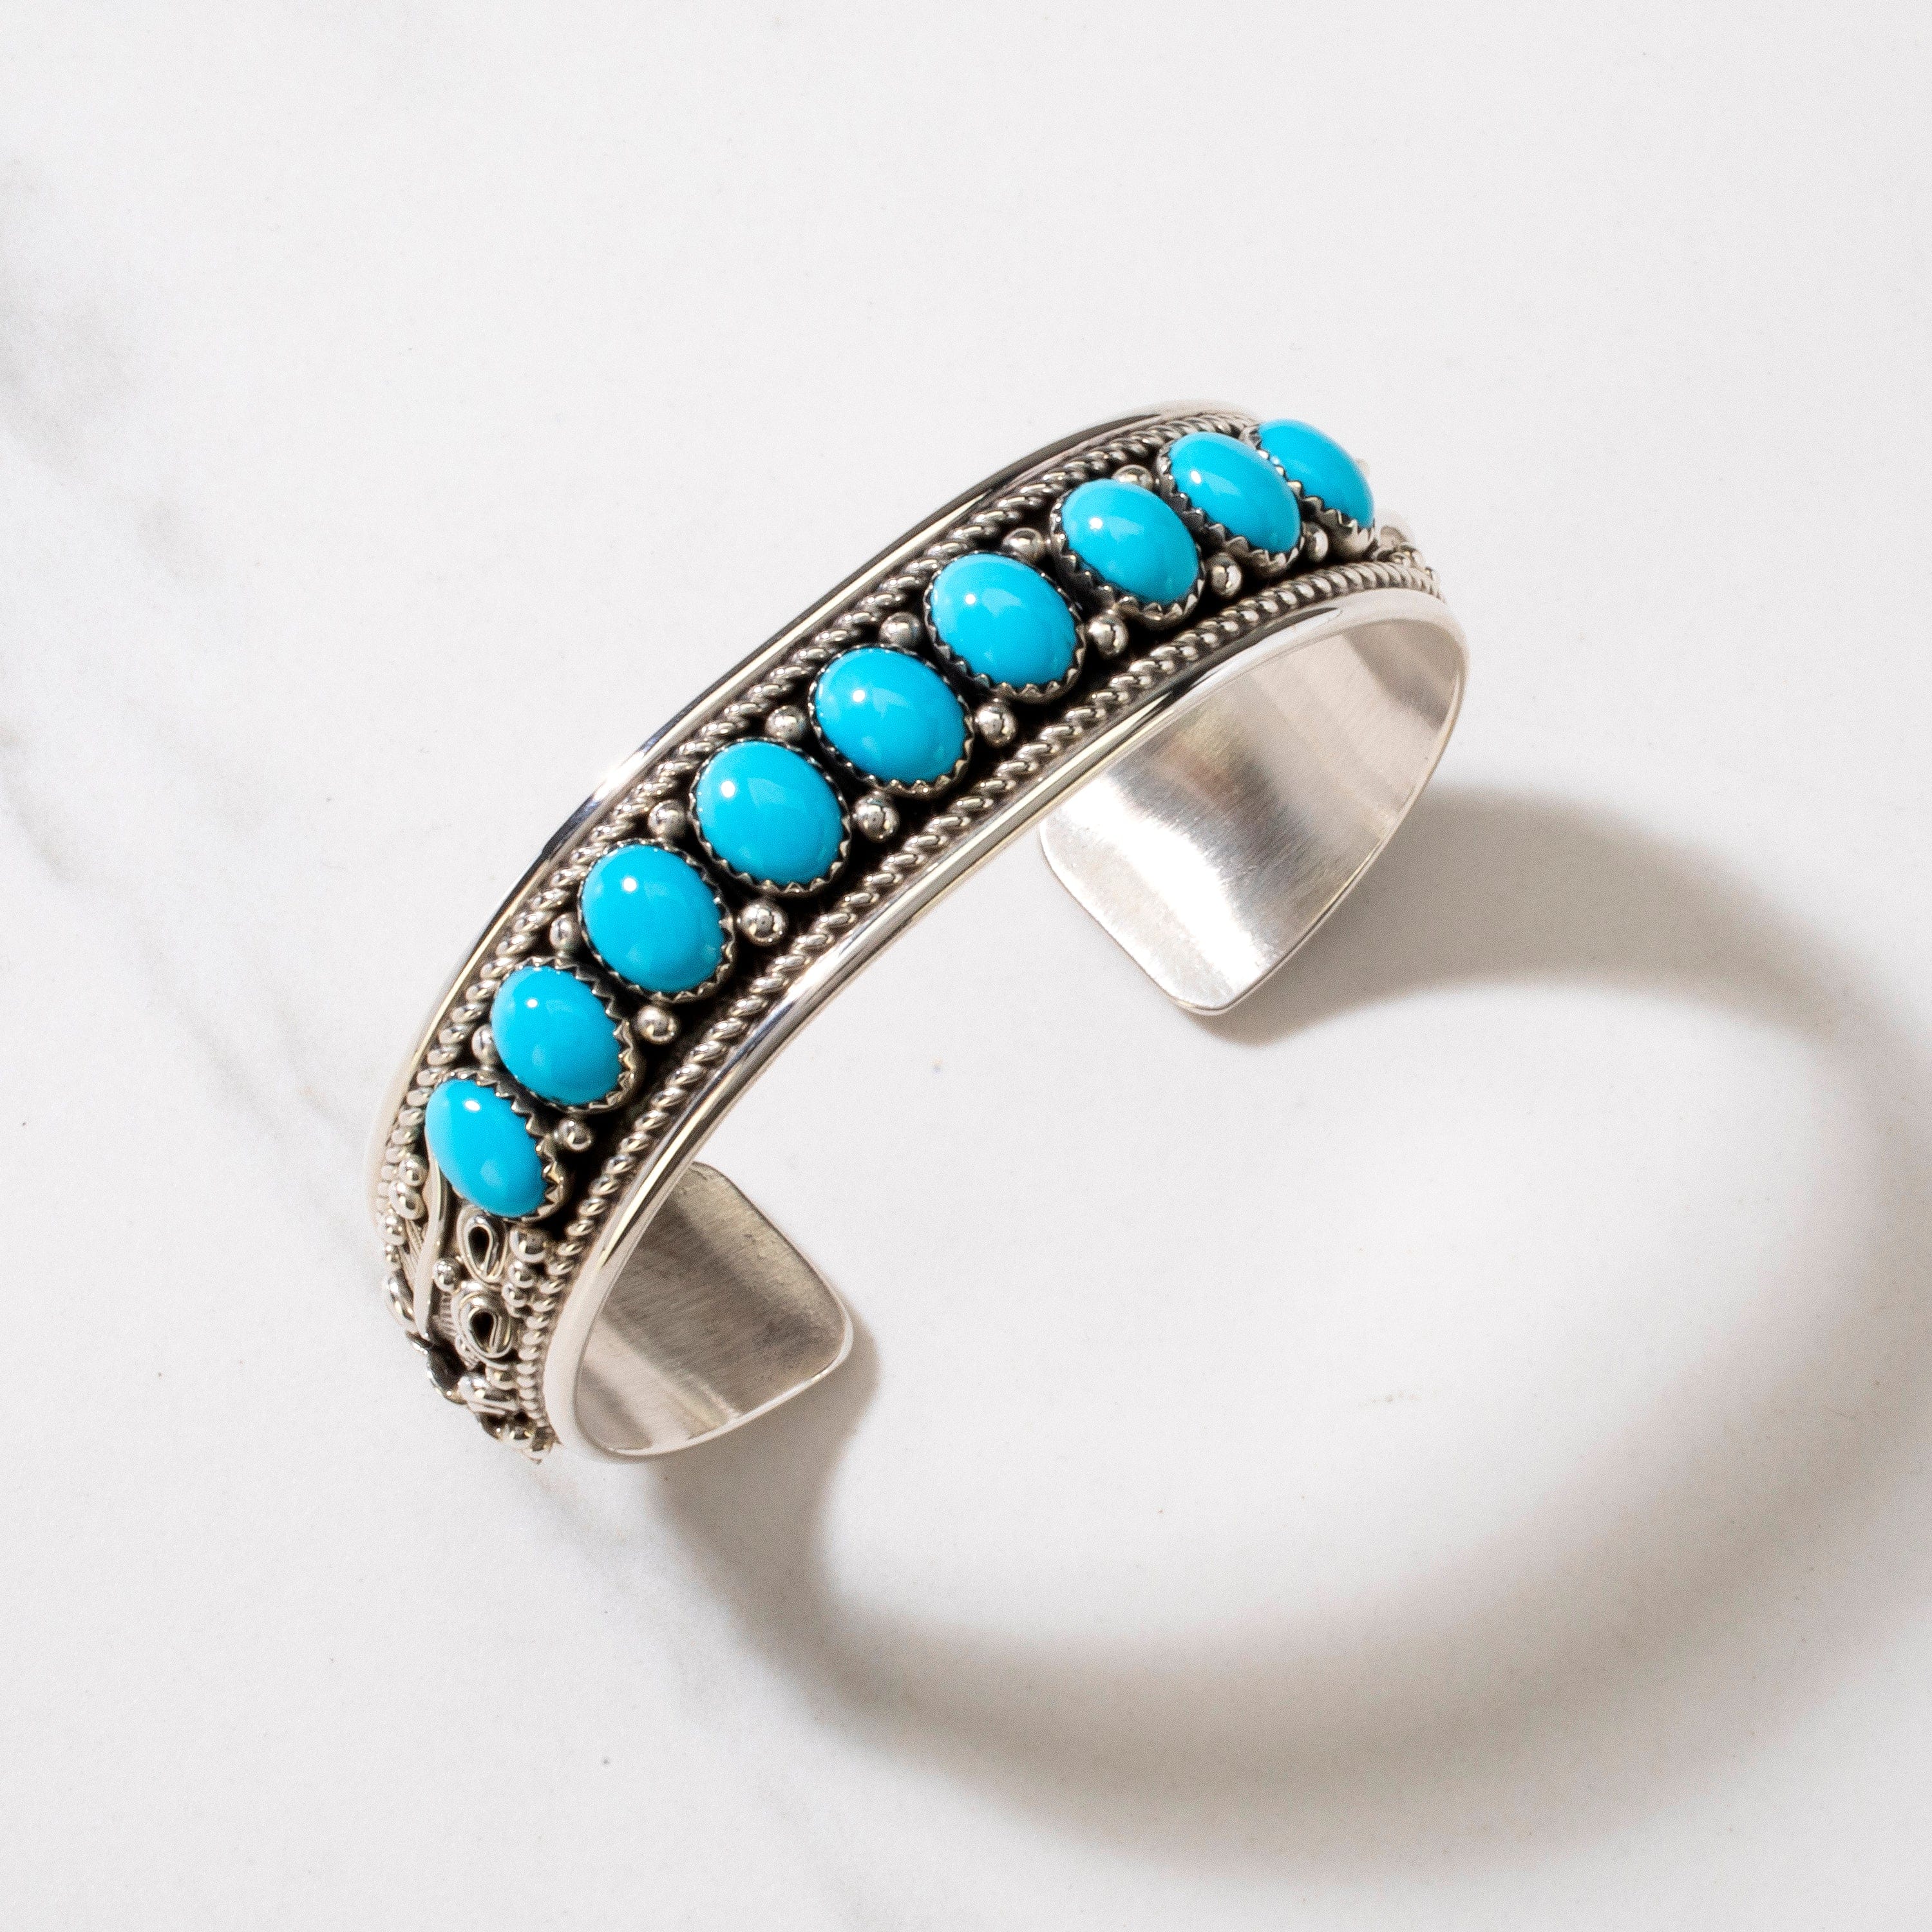 Kalifano Native American Jewelry Evelyne & Edwards James Sleeping Beauty Turquoise Navajo USA Native American Made 925 Sterling Silver Cuff NAB1400.004